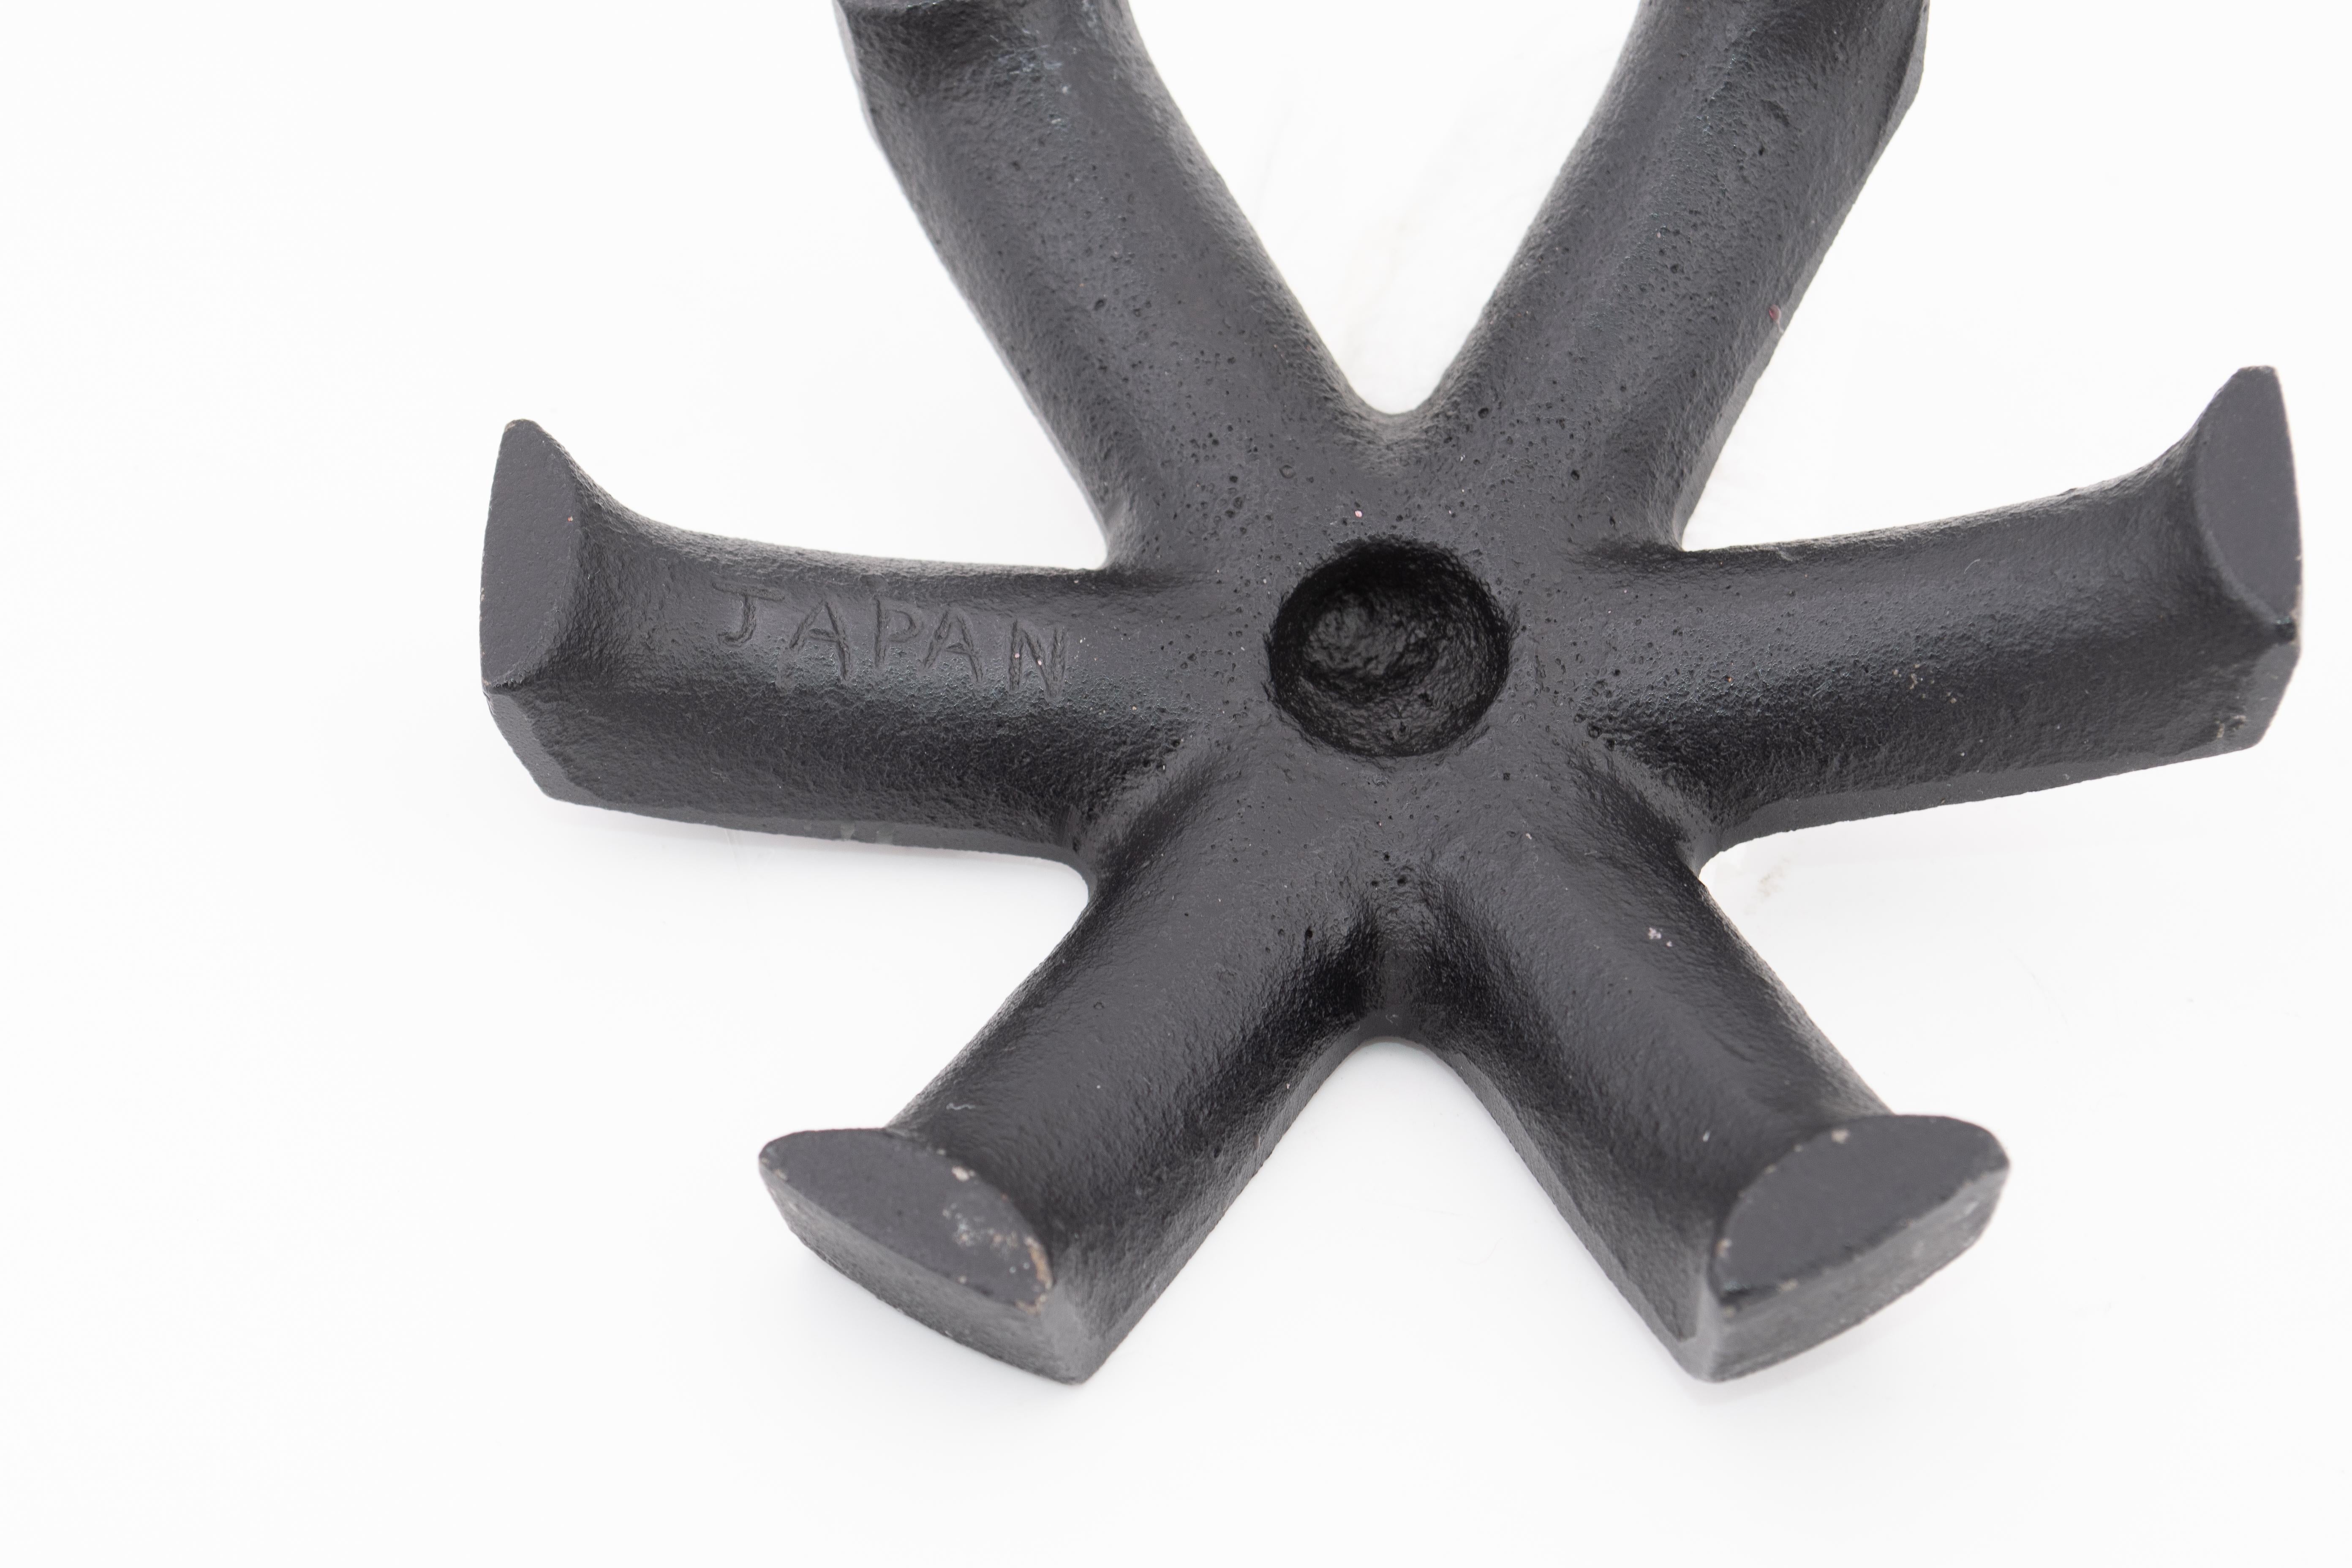 Japanese cast iron candleholder inspired by Quistgaard, Denmark
Cast iron 1960s candleholder. Mid-Century Modern Brutalist spider MCM Style made in Japan.
 